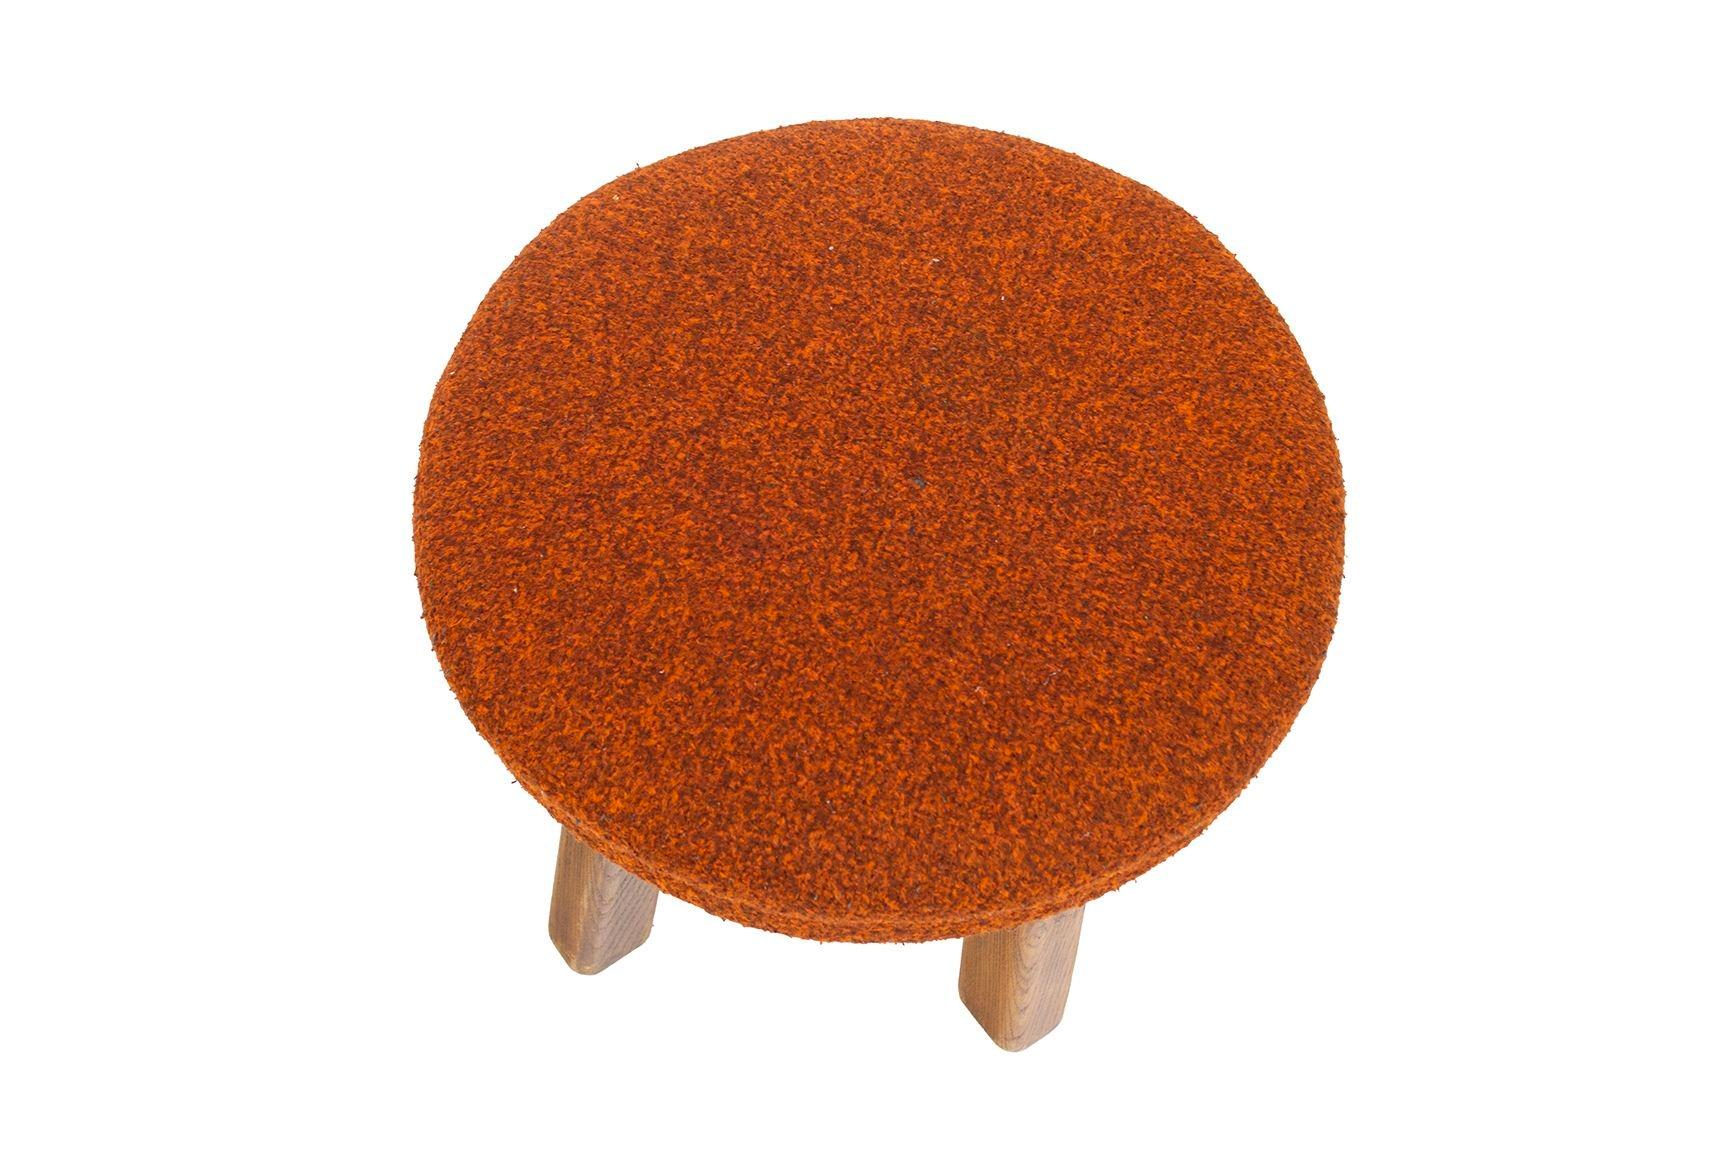 USA, 1960s
Handmade vintage oak stool with chunky legs and burnt orange upholstery. Very cute, personality-filled occasional piece.
CONDITION NOTES: Some mustiness to upholstery, reupholstery or cleaning is recommended. Otherwise, it presents well